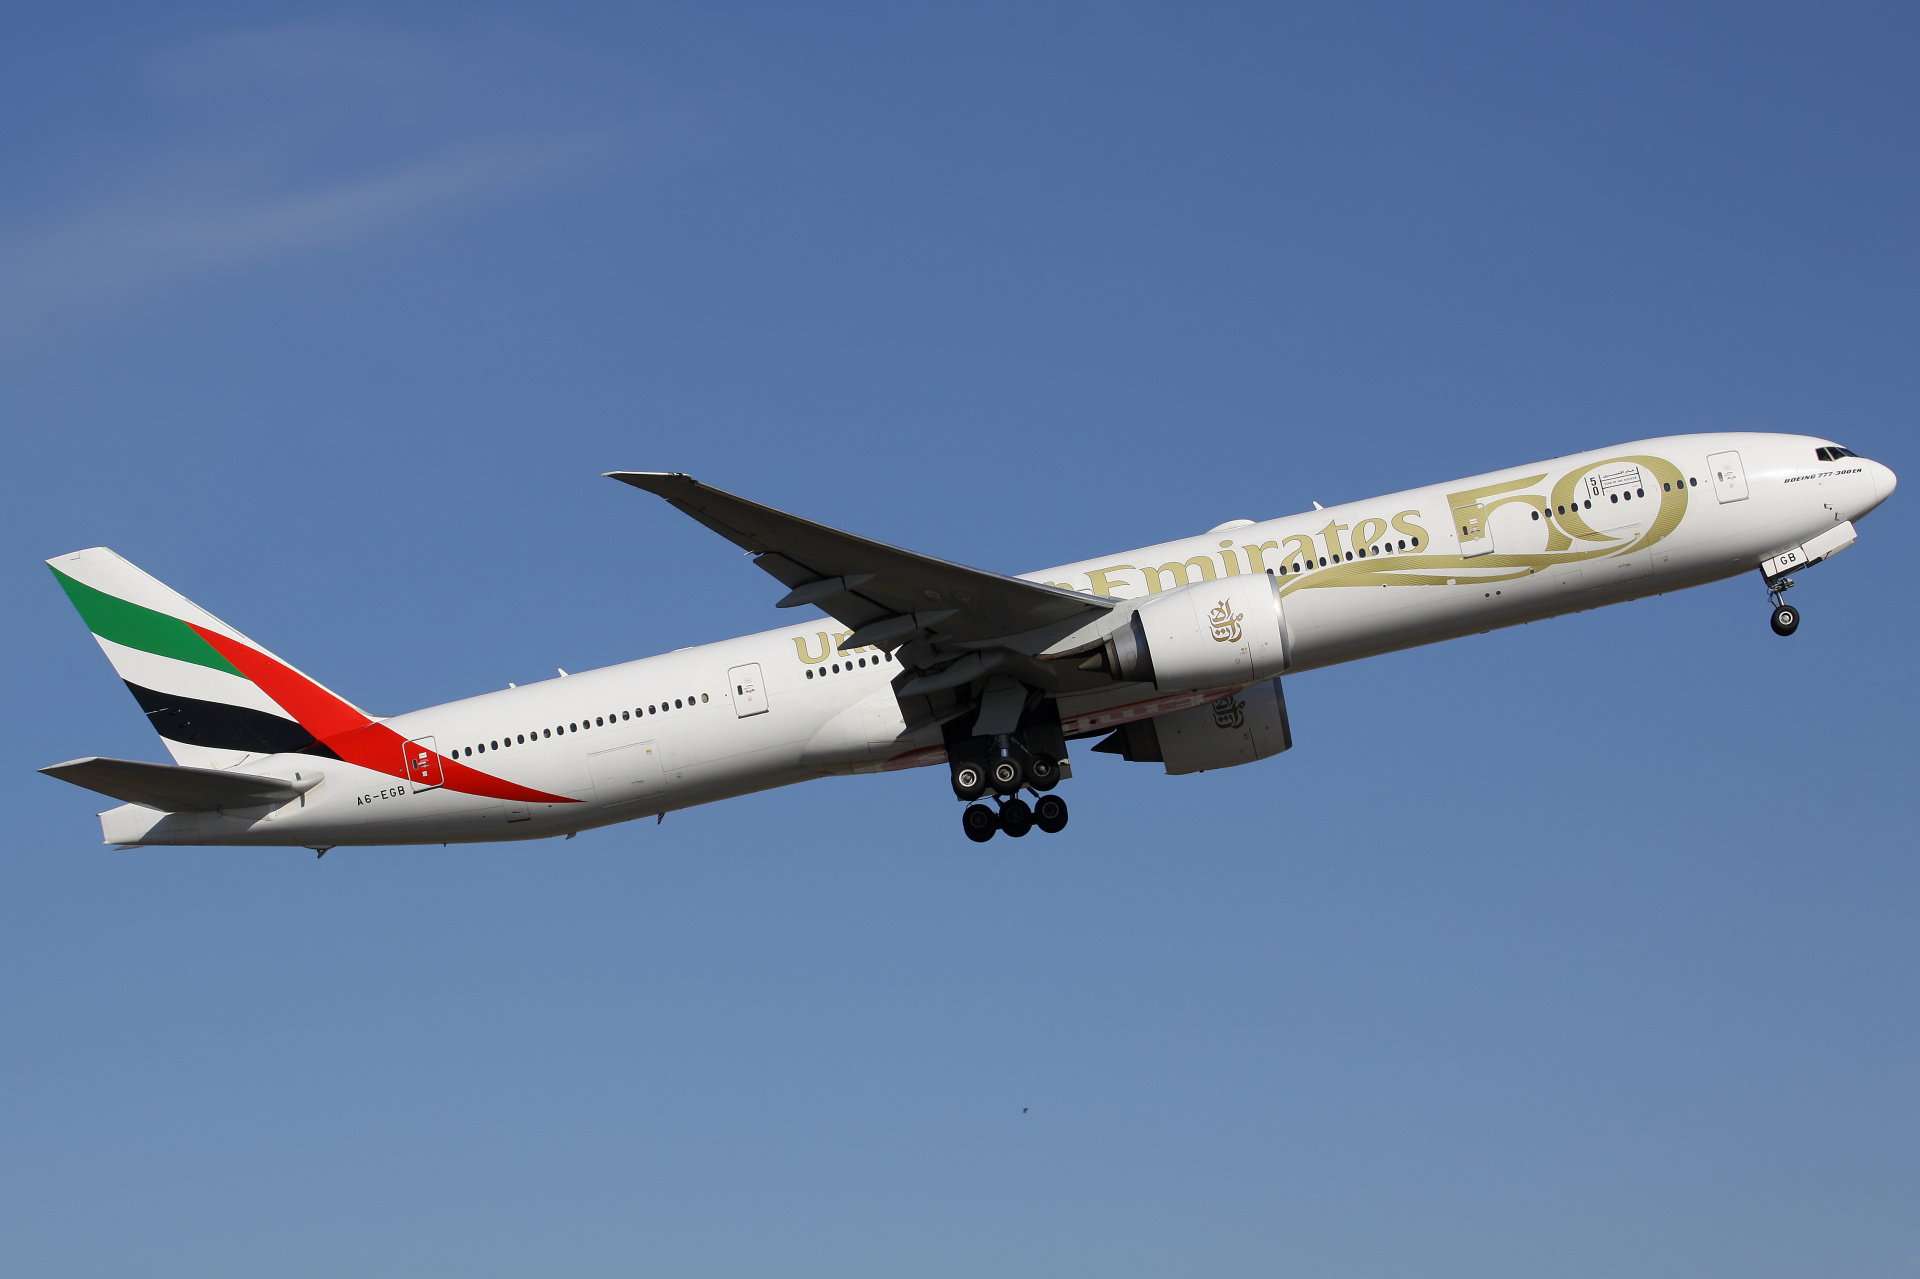 A6-EGB (Year of the Fiftieth livery) (Aircraft » EPWA Spotting » Boeing 777-300ER » Emirates)